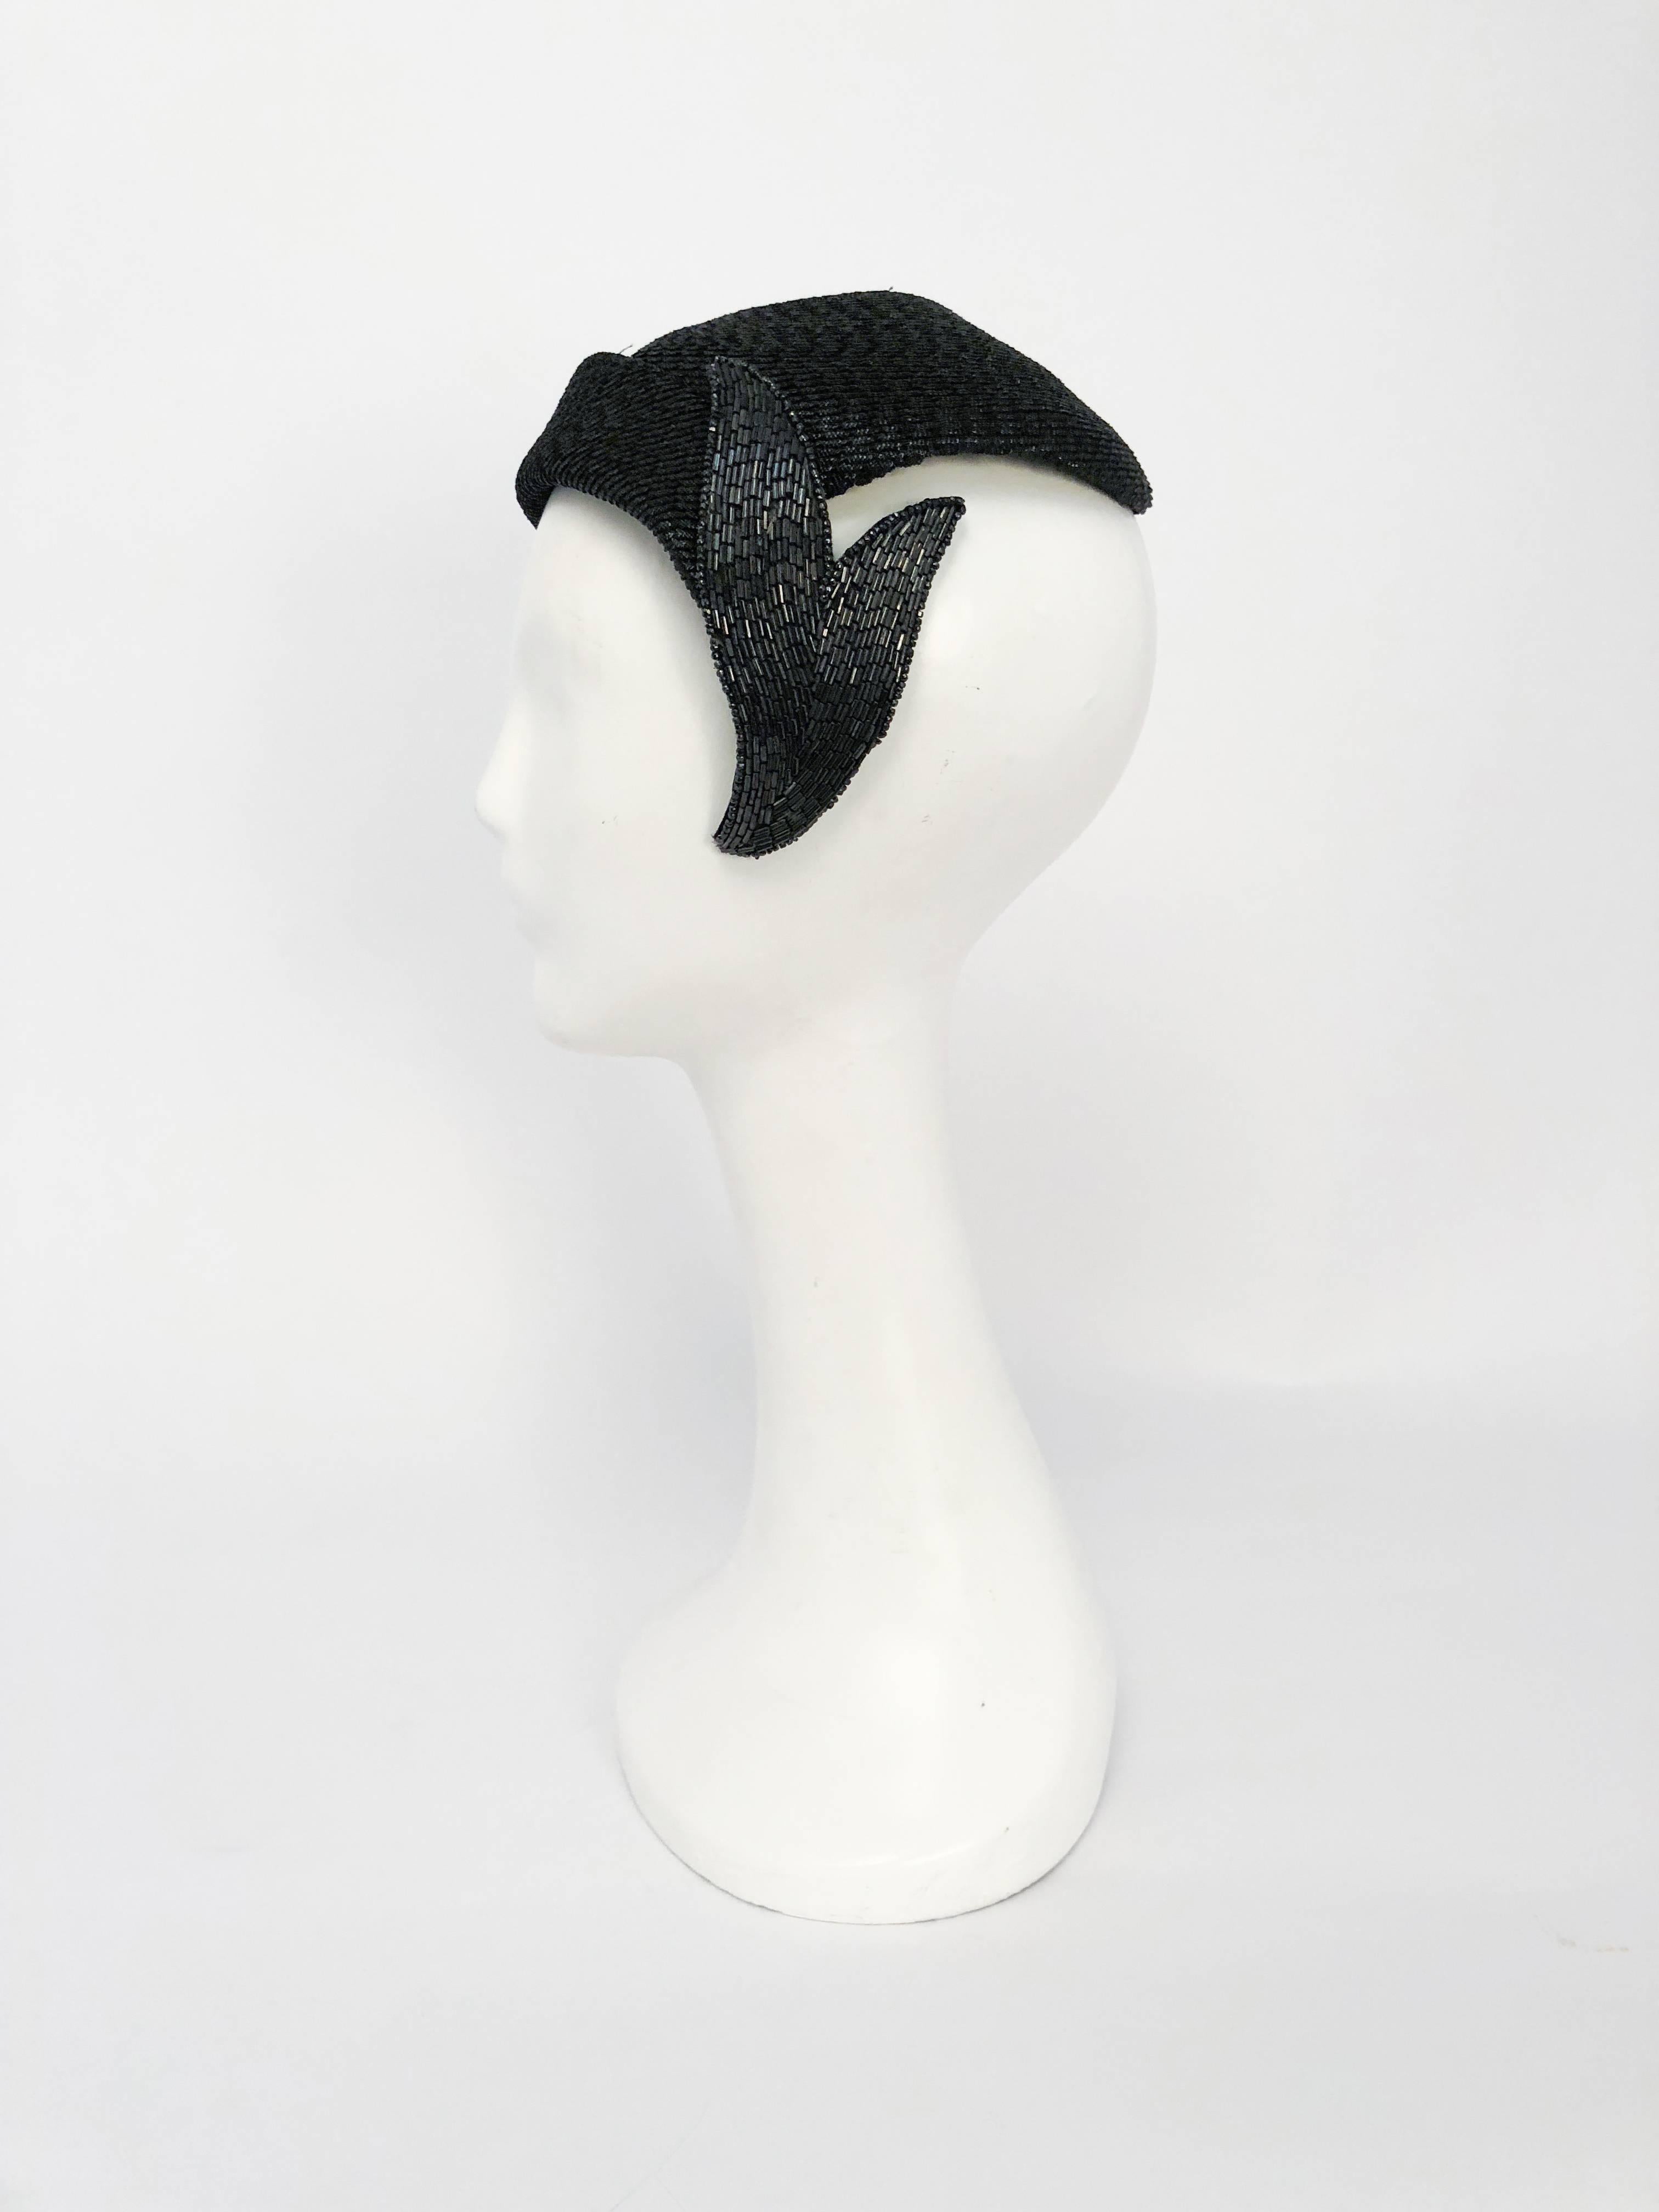 1950s Black Woven Straw Hat with Beaded Leaf. Black woven coated straw cocktail hat with bugle beaded leaf motif on one side. 